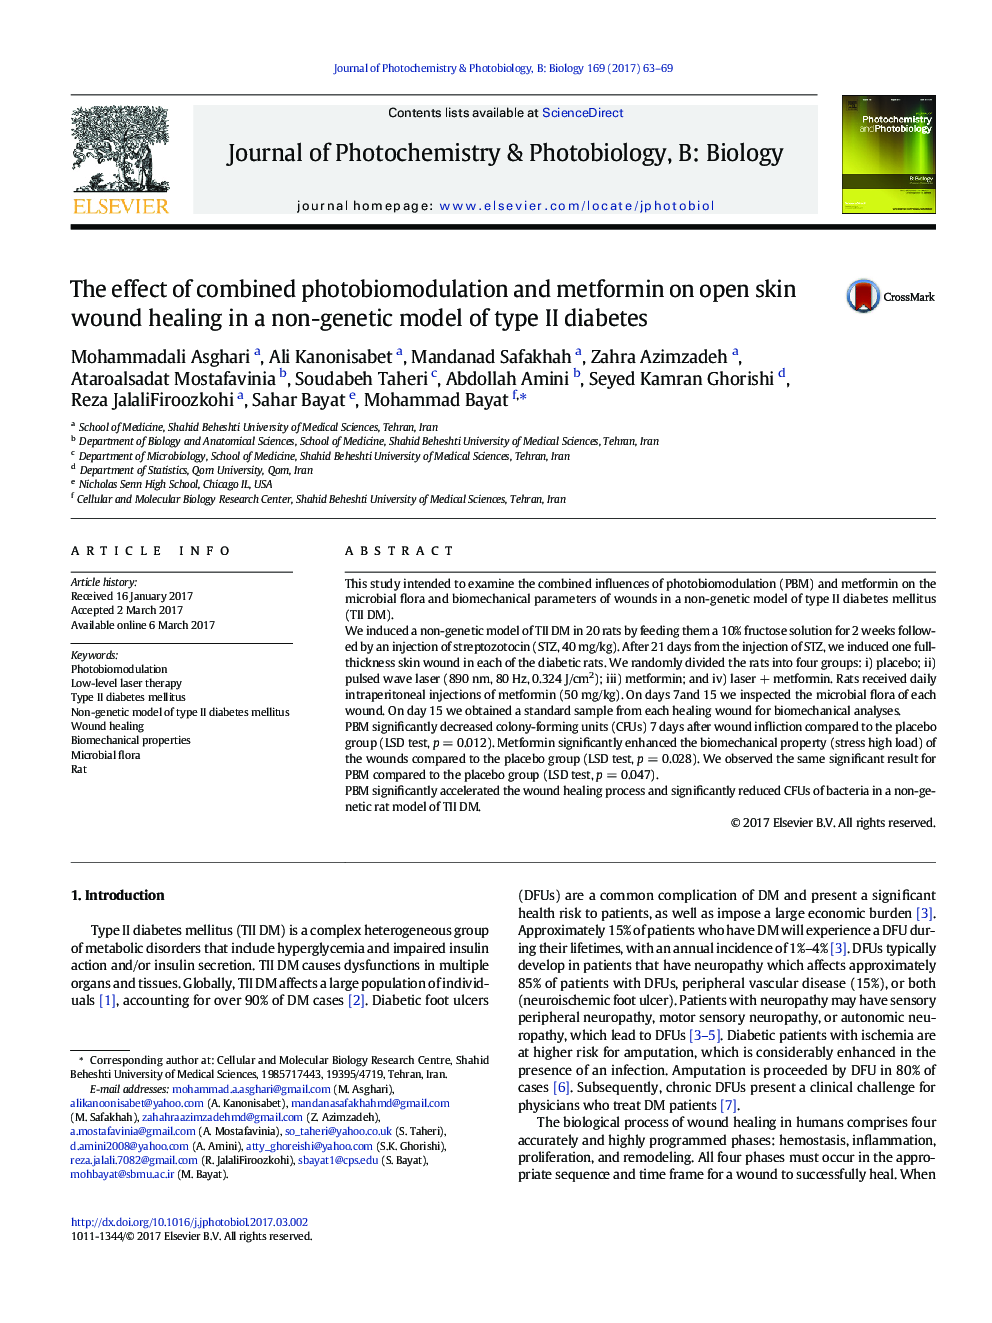 The effect of combined photobiomodulation and metformin on open skin wound healing in a non-genetic model of type II diabetes